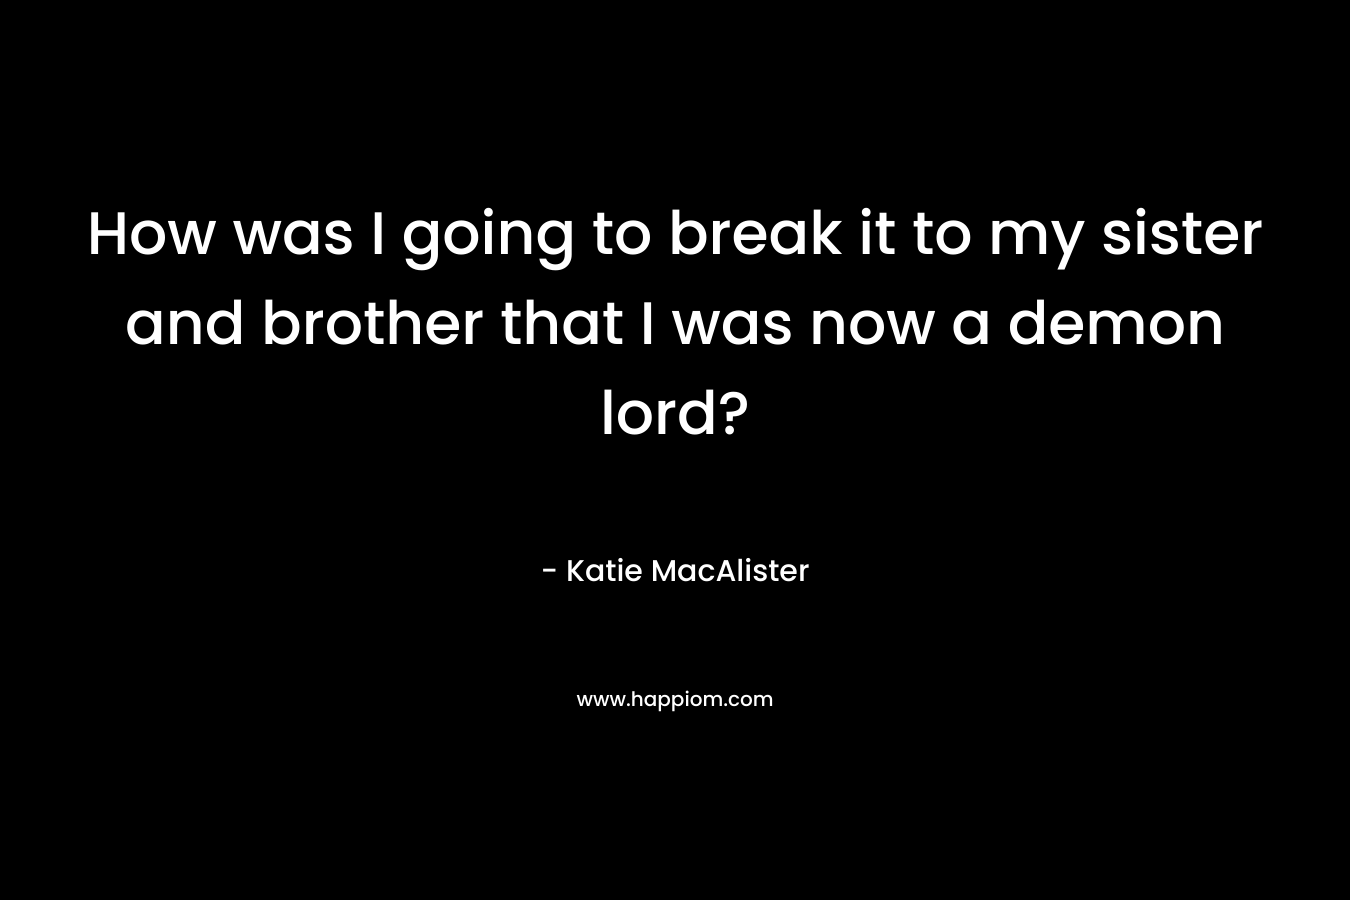 How was I going to break it to my sister and brother that I was now a demon lord? – Katie MacAlister